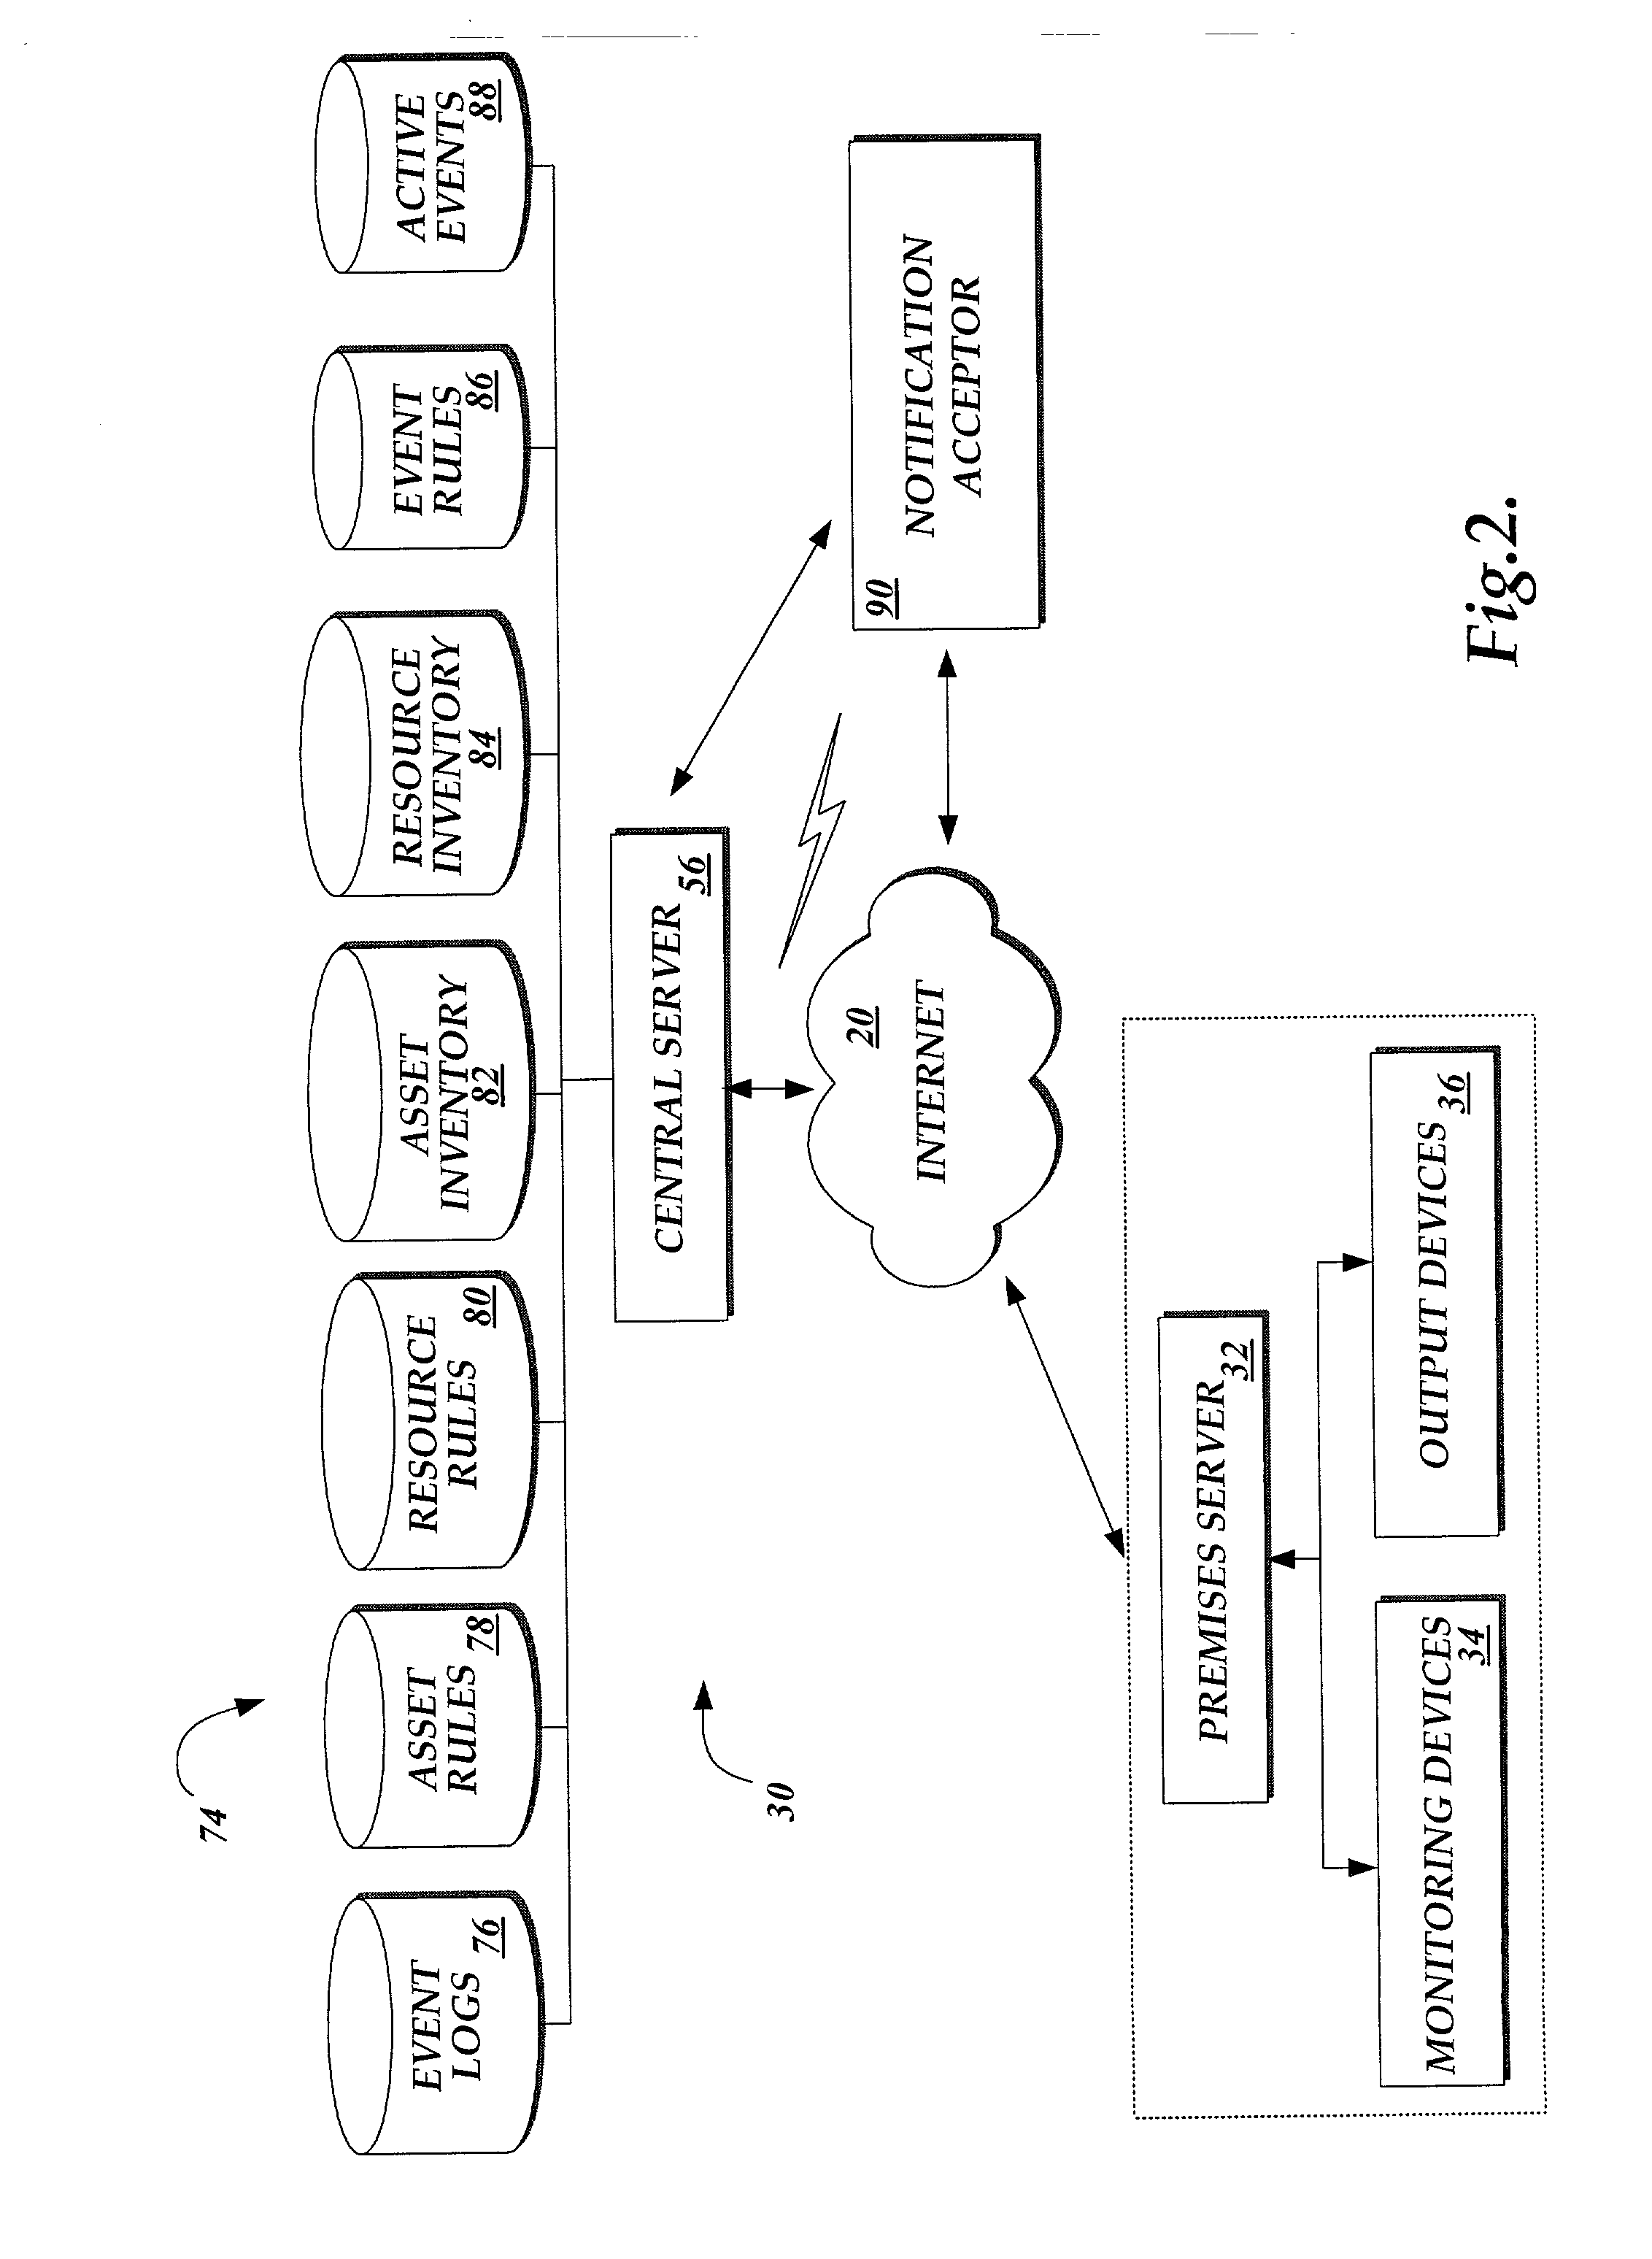 System and method for providing configurable security monitoring utilizing an integrated information system